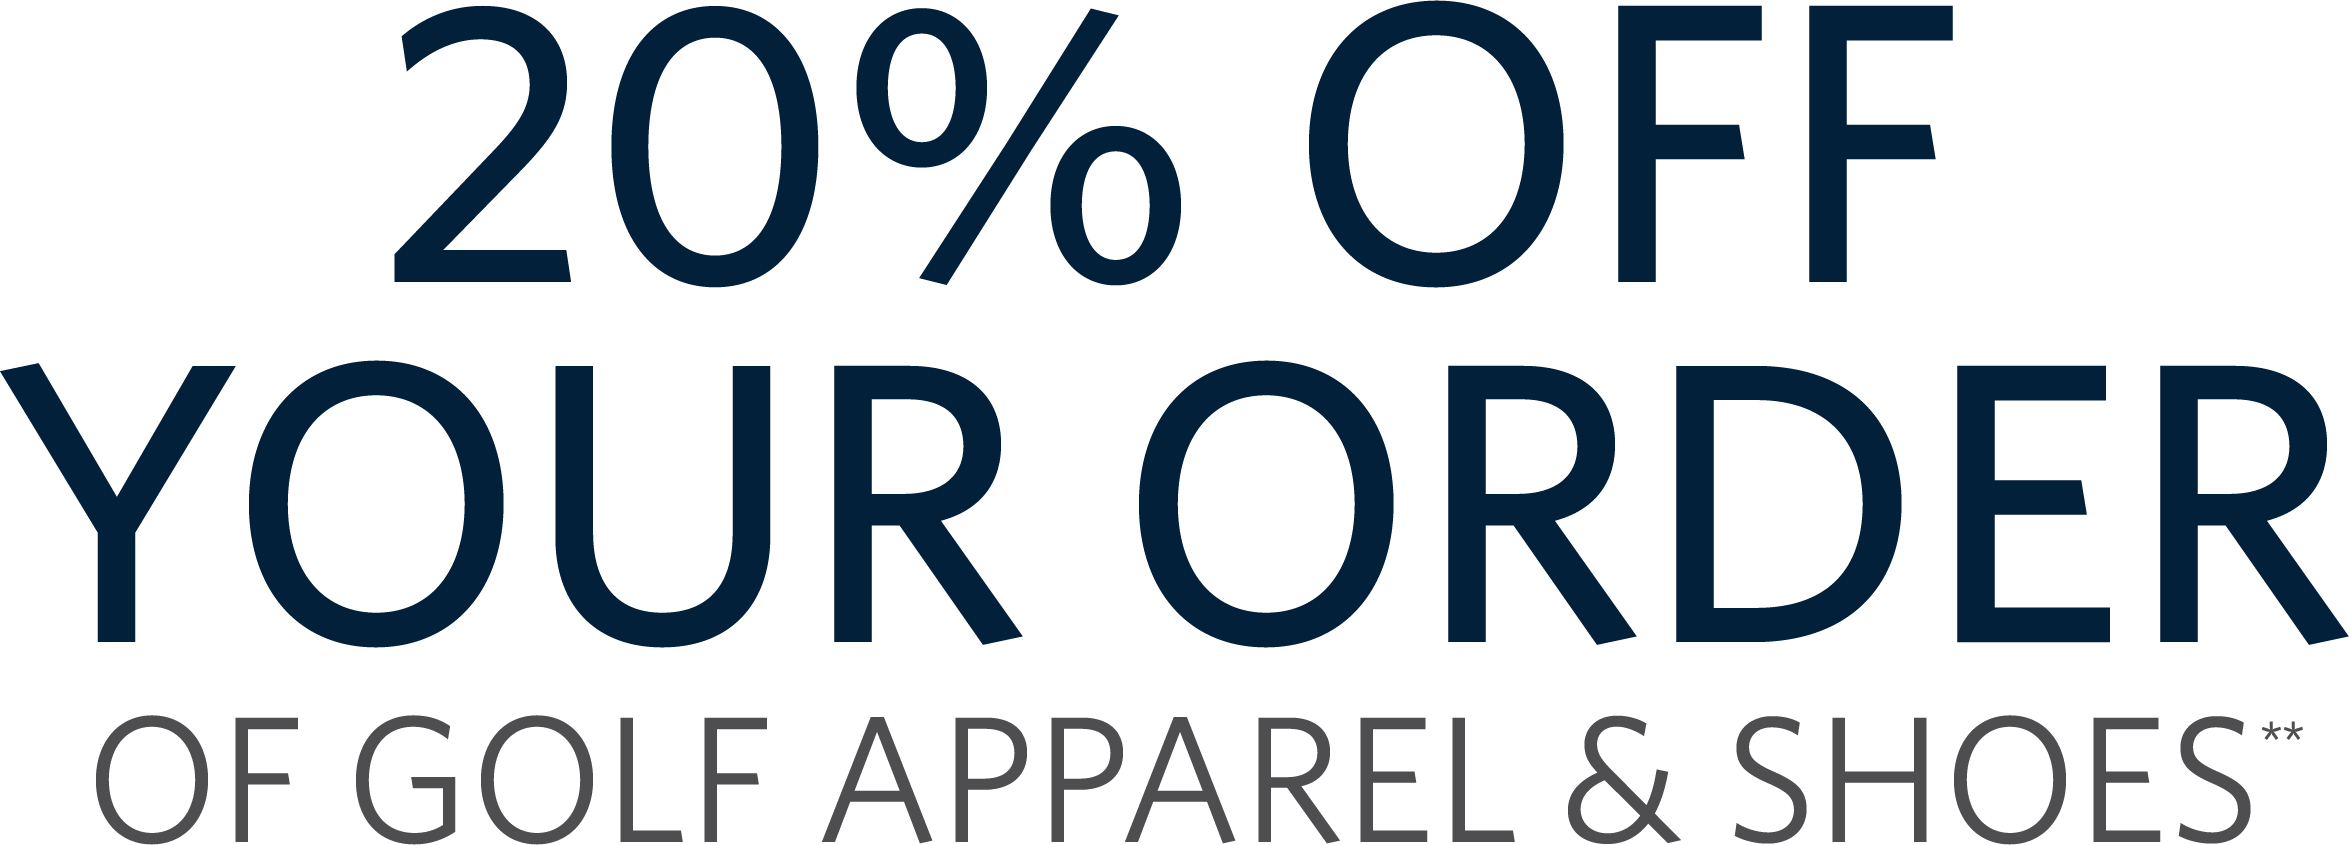 20% Off Your Entire Order of Golf Apparel and Shoes